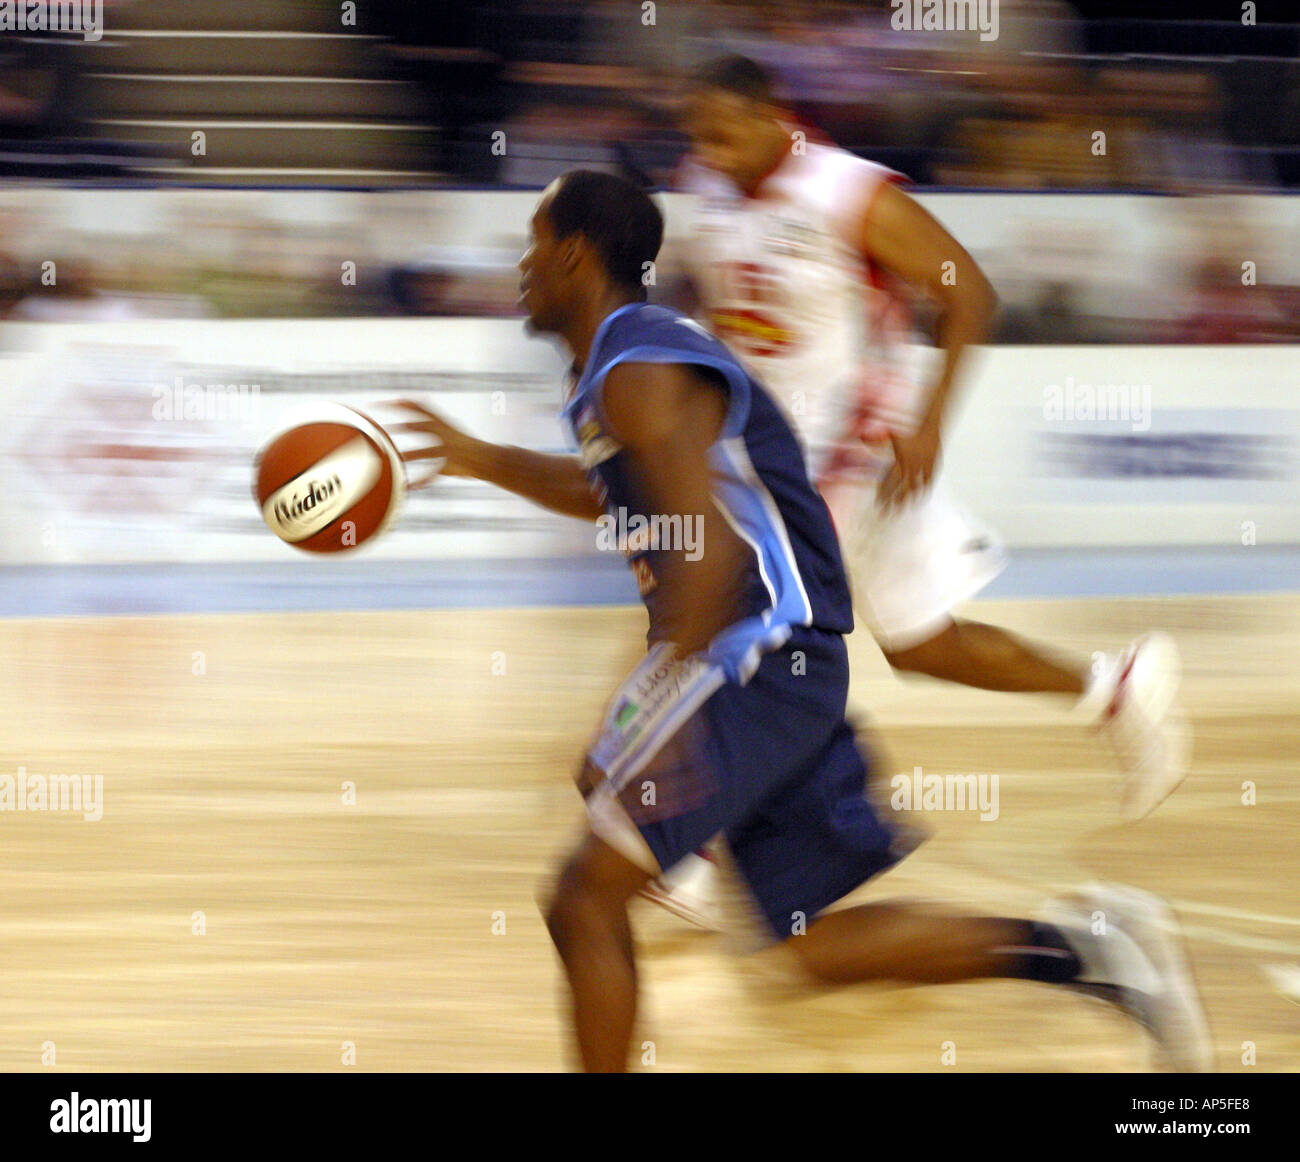 High speed basketball game action Stock Photo - Alamy